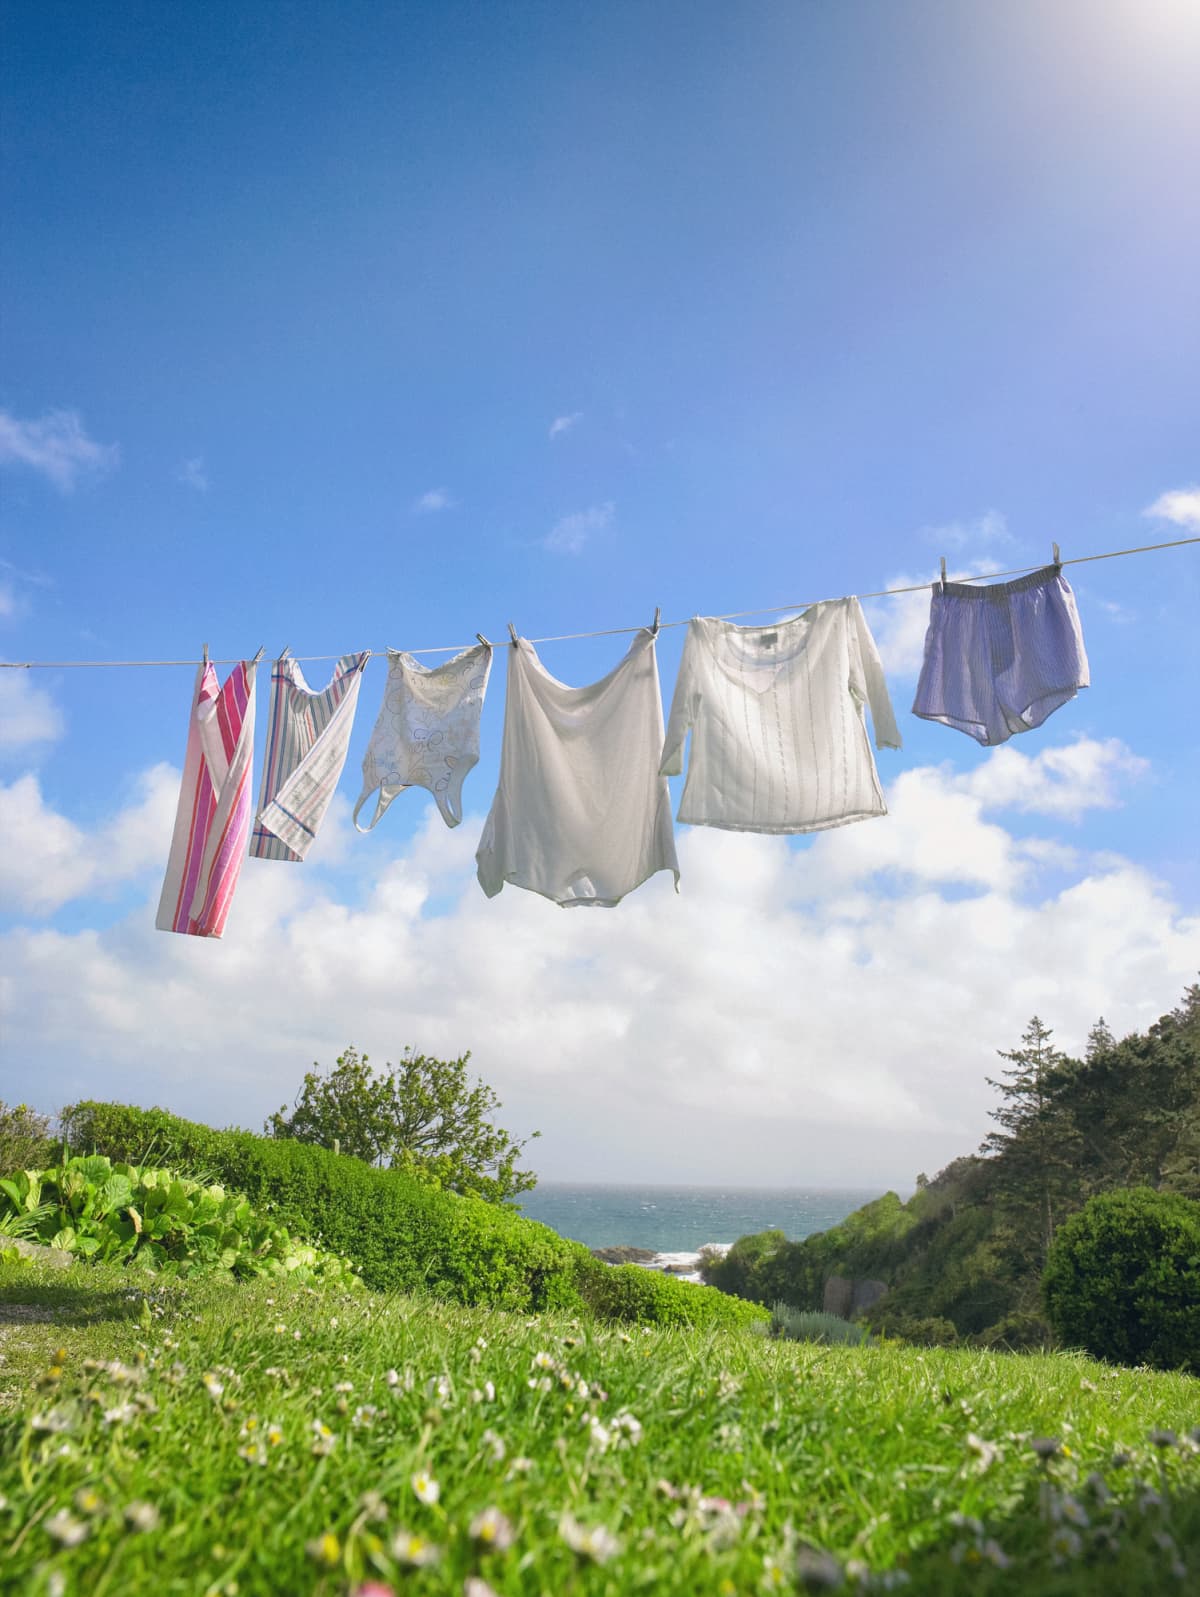 Clothes hanging on outdoor clothesline during sunny day